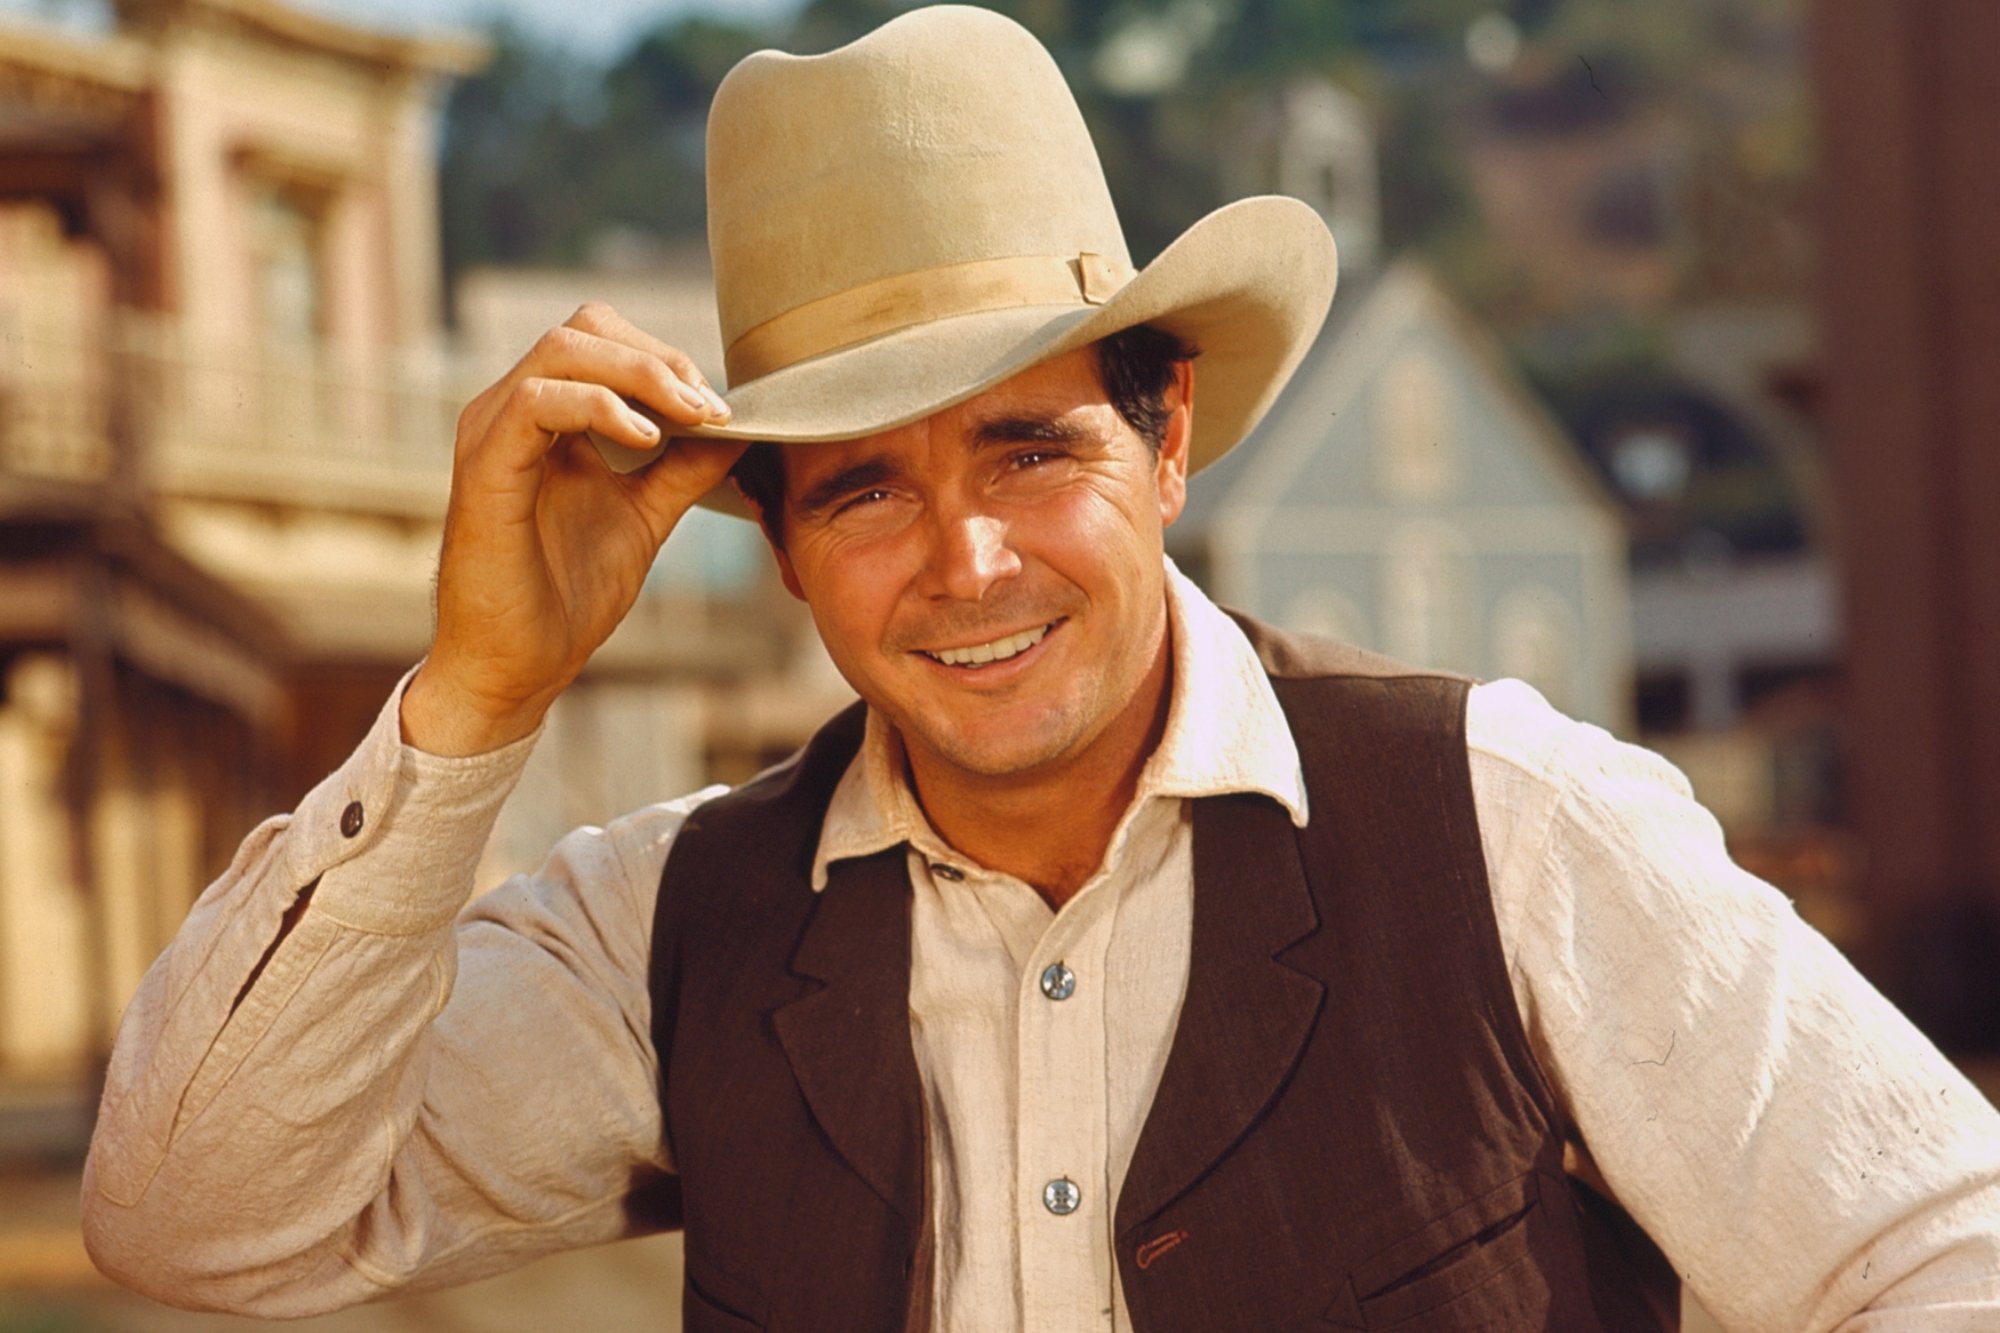 'Gunsmoke' Buck Taylor as Newly O'Brien wearing a vest, collared shirt, and cowboy hat. He has his hand on the rim of the hat and is smiling.